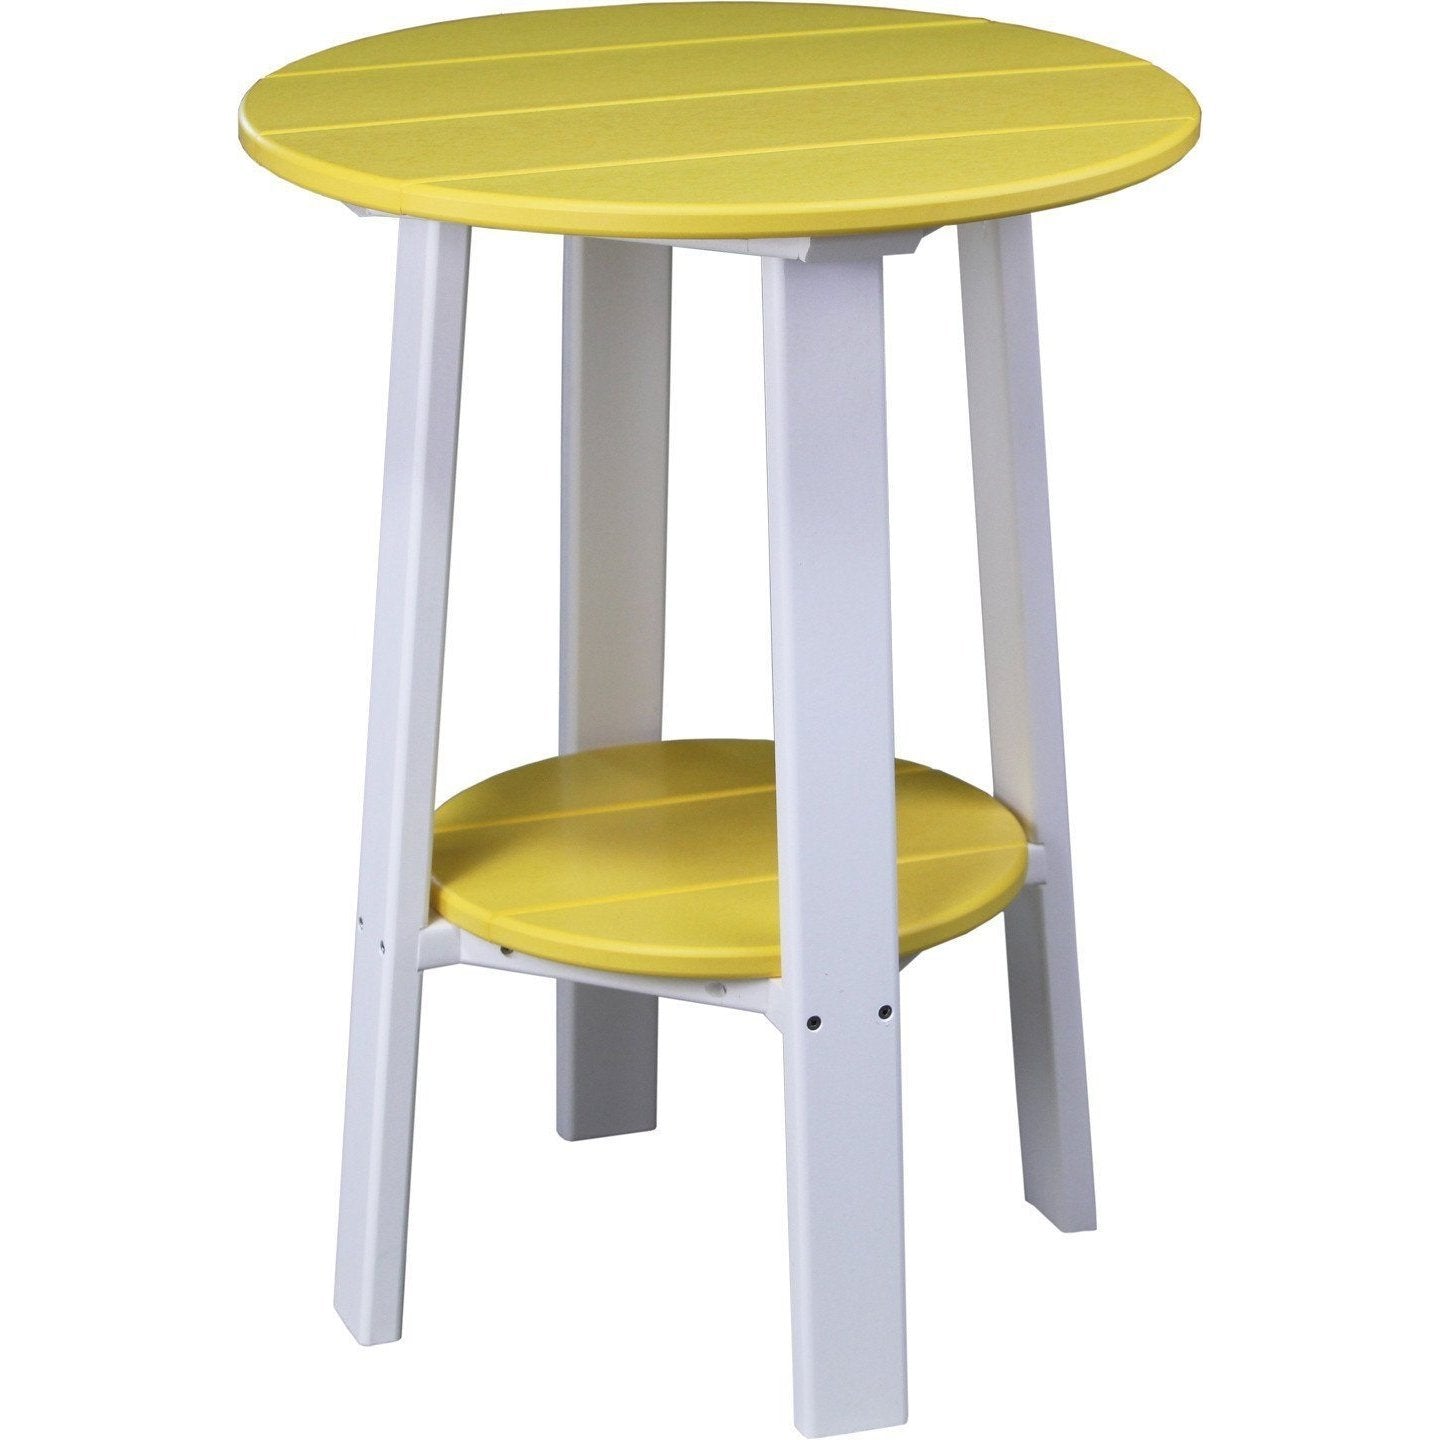 Outdoor 28" Deluxe End Table   Yellow & White